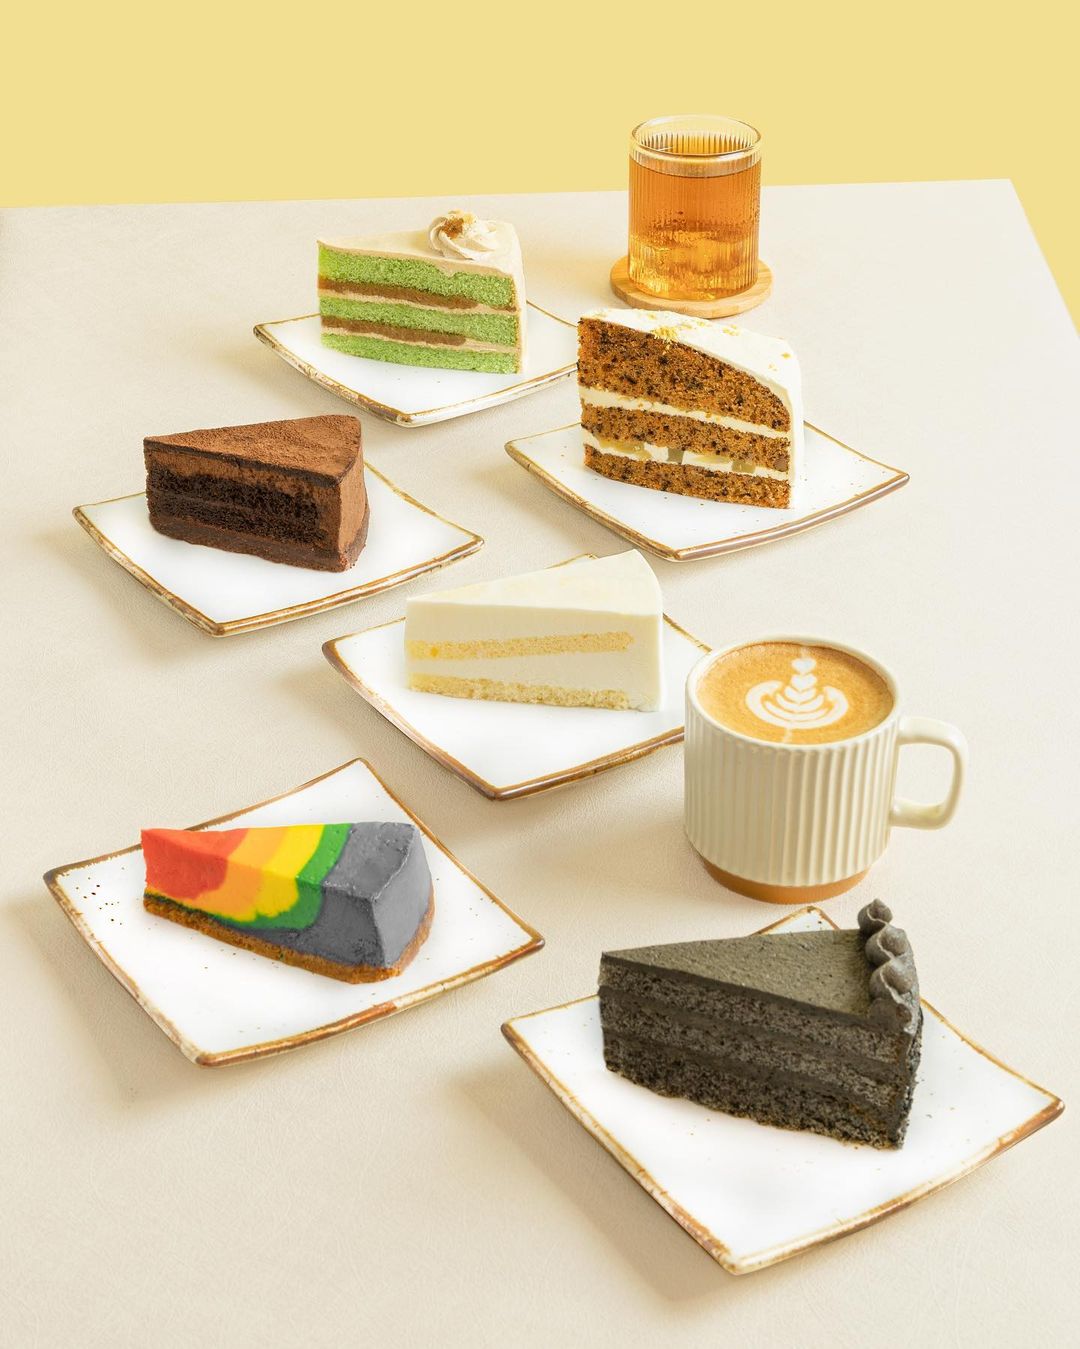 staple-food-cafe-cakes